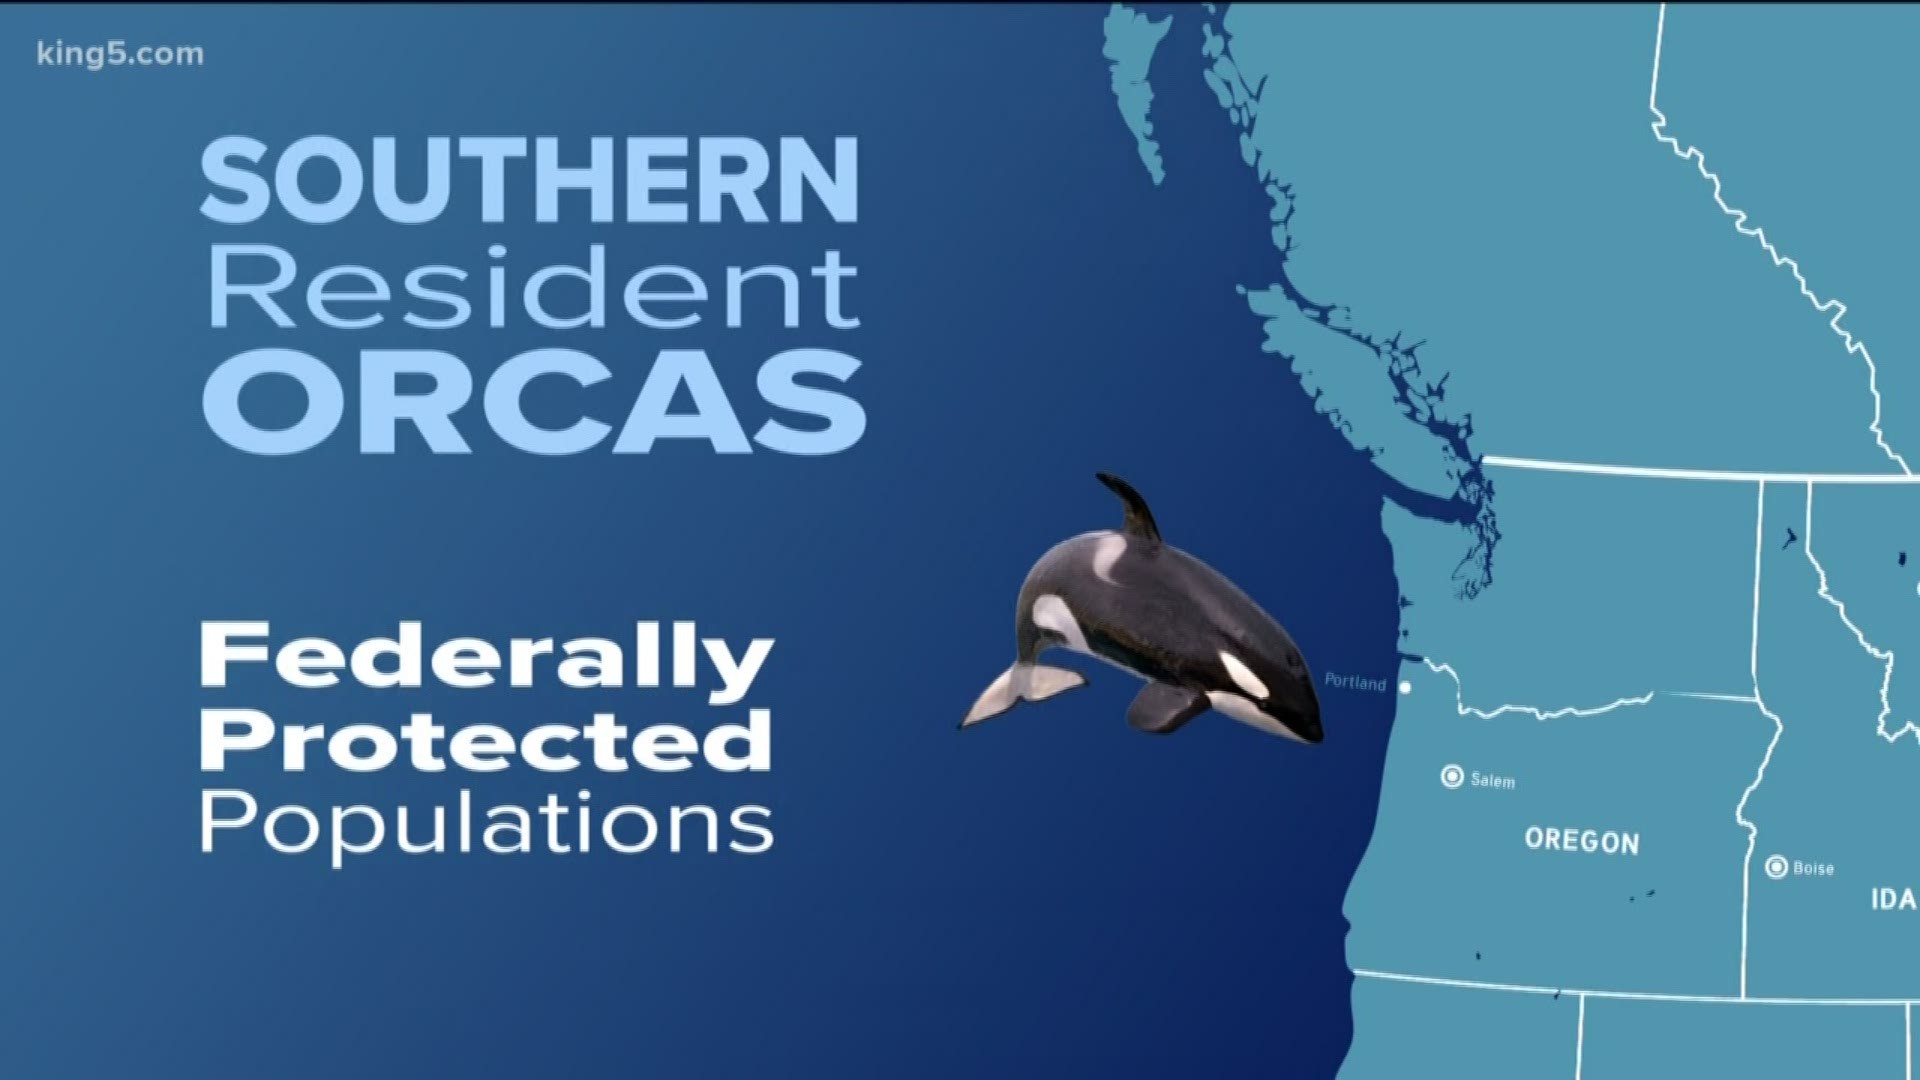 The experts all agree: The southern resident killer whales that live in our waters are in a desperate situation.